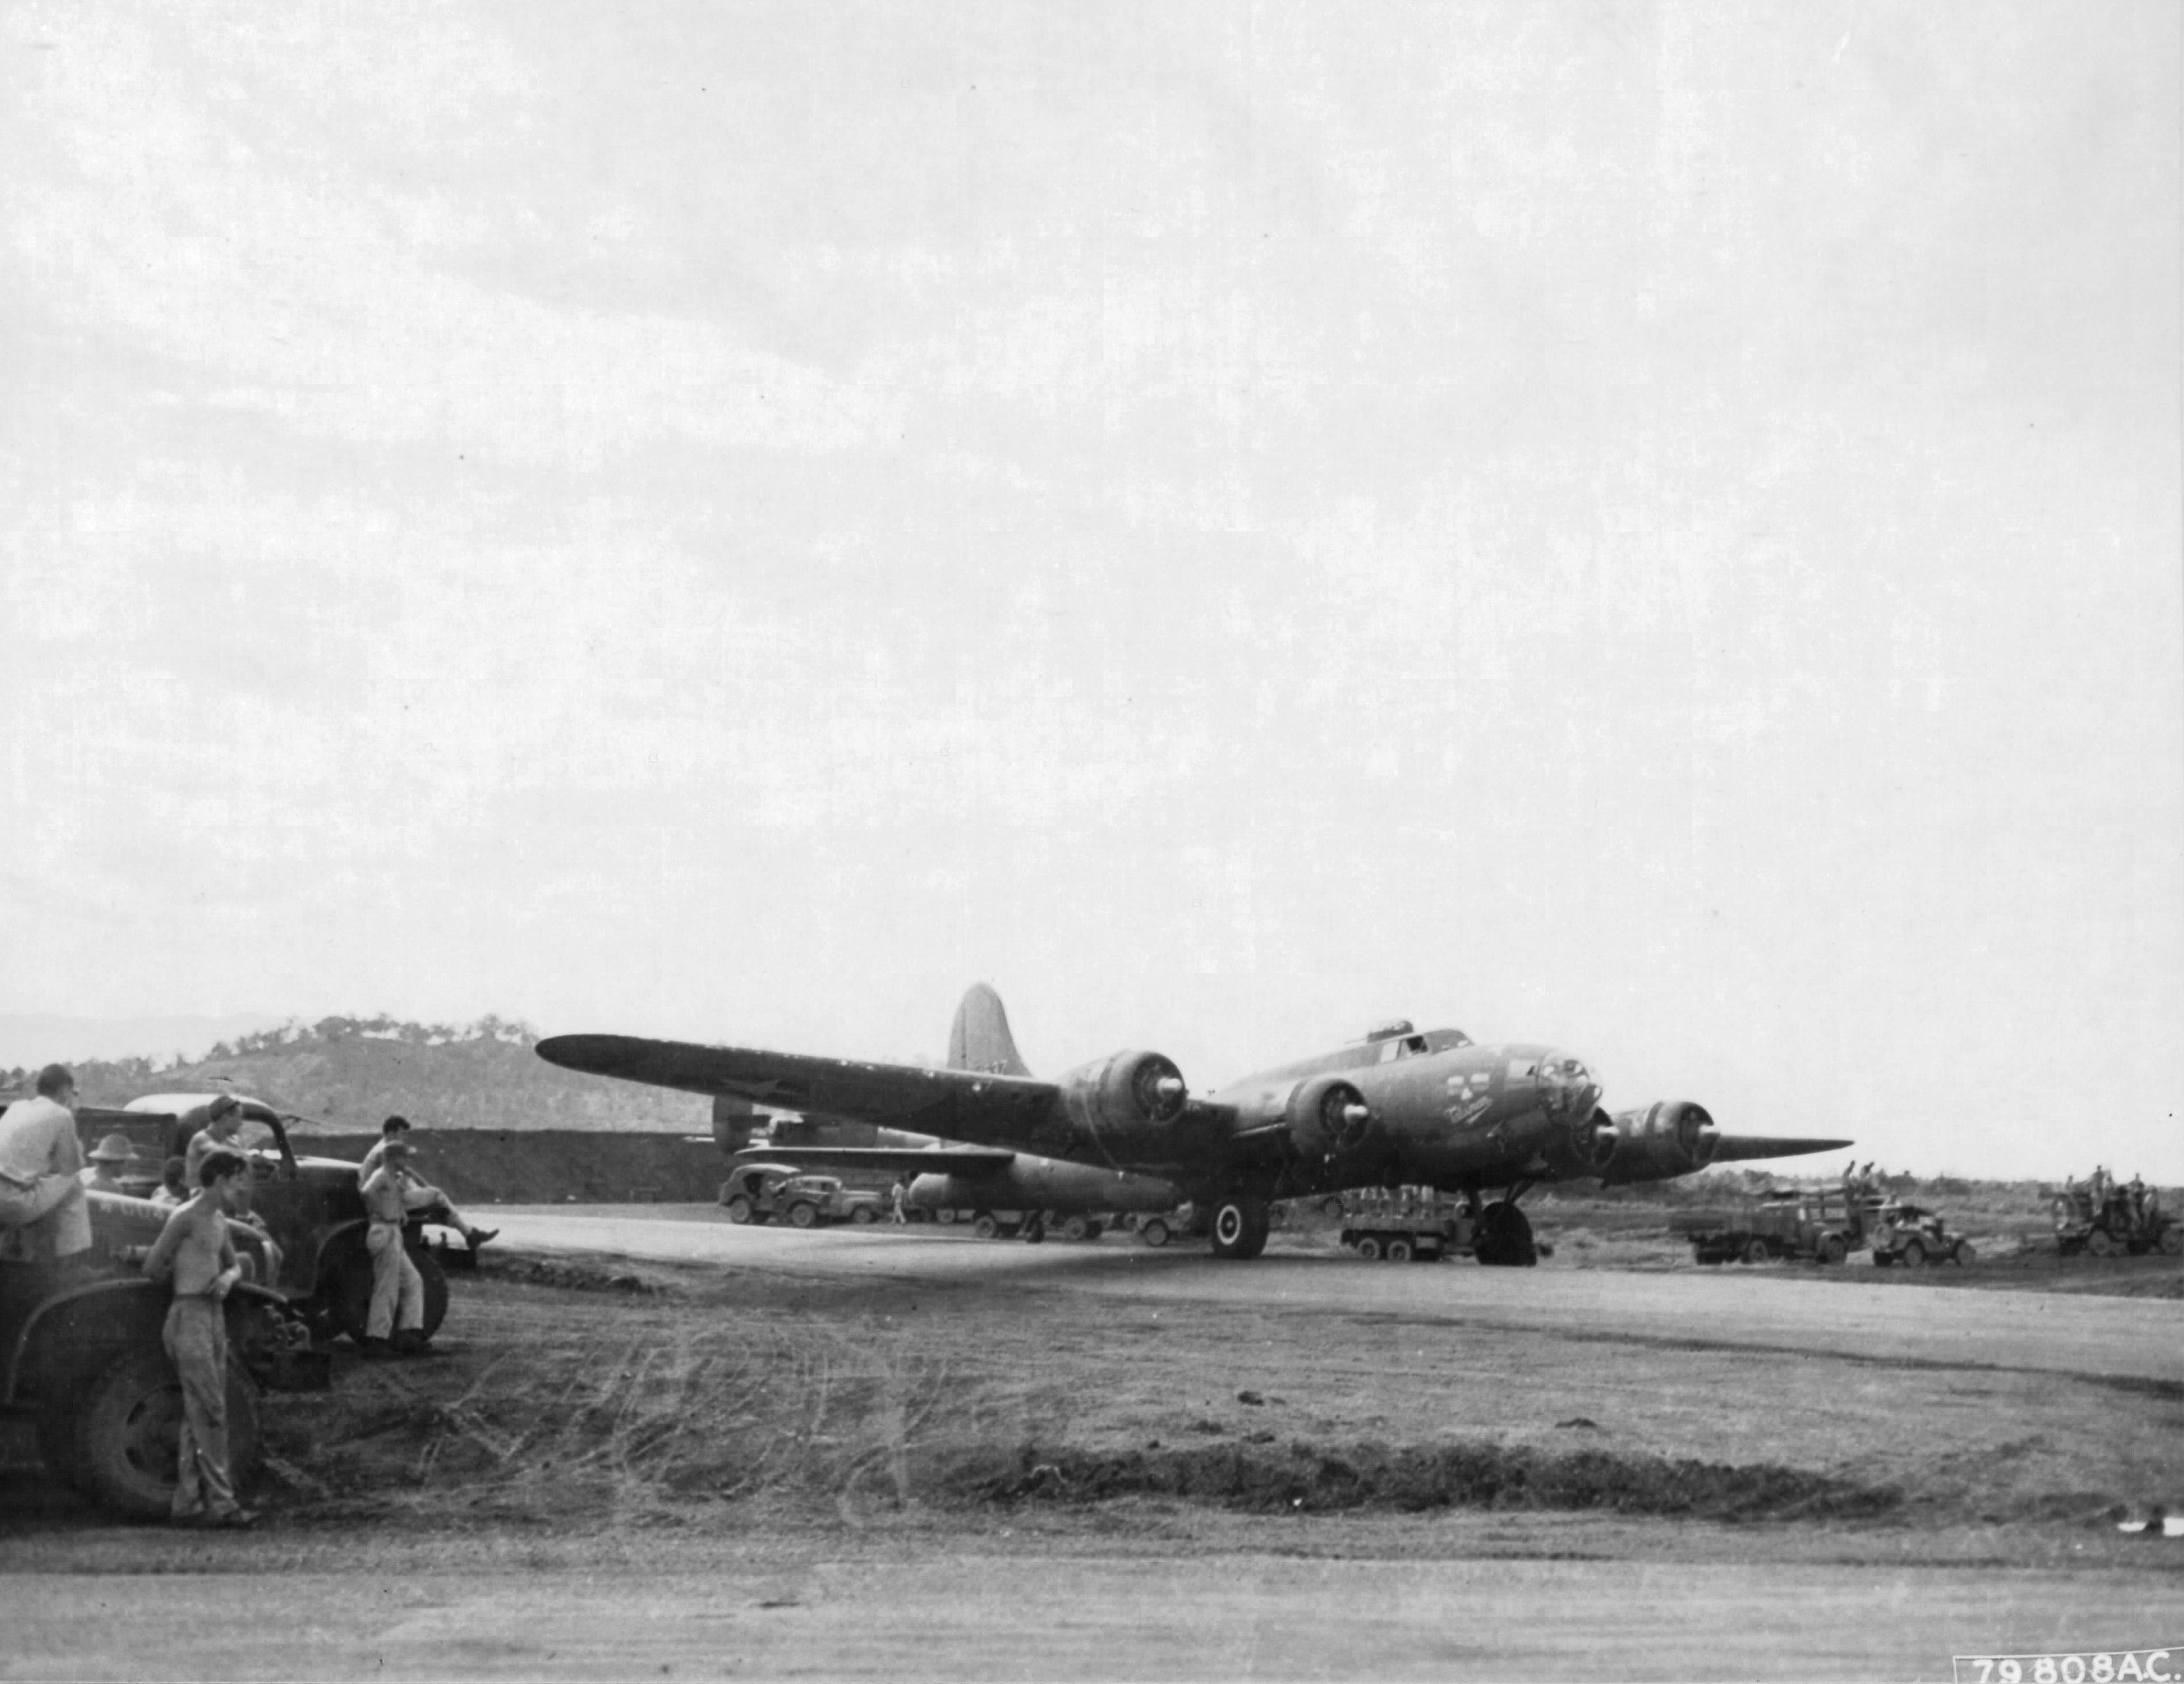 B-17F Fortress “Talisman” warming up before take-off from Jackson’s Drome, Port Moresby, New Guinea, 5 Sep 1943. This plane carried Douglas MacArthur to and from the battle zones in New Guinea.